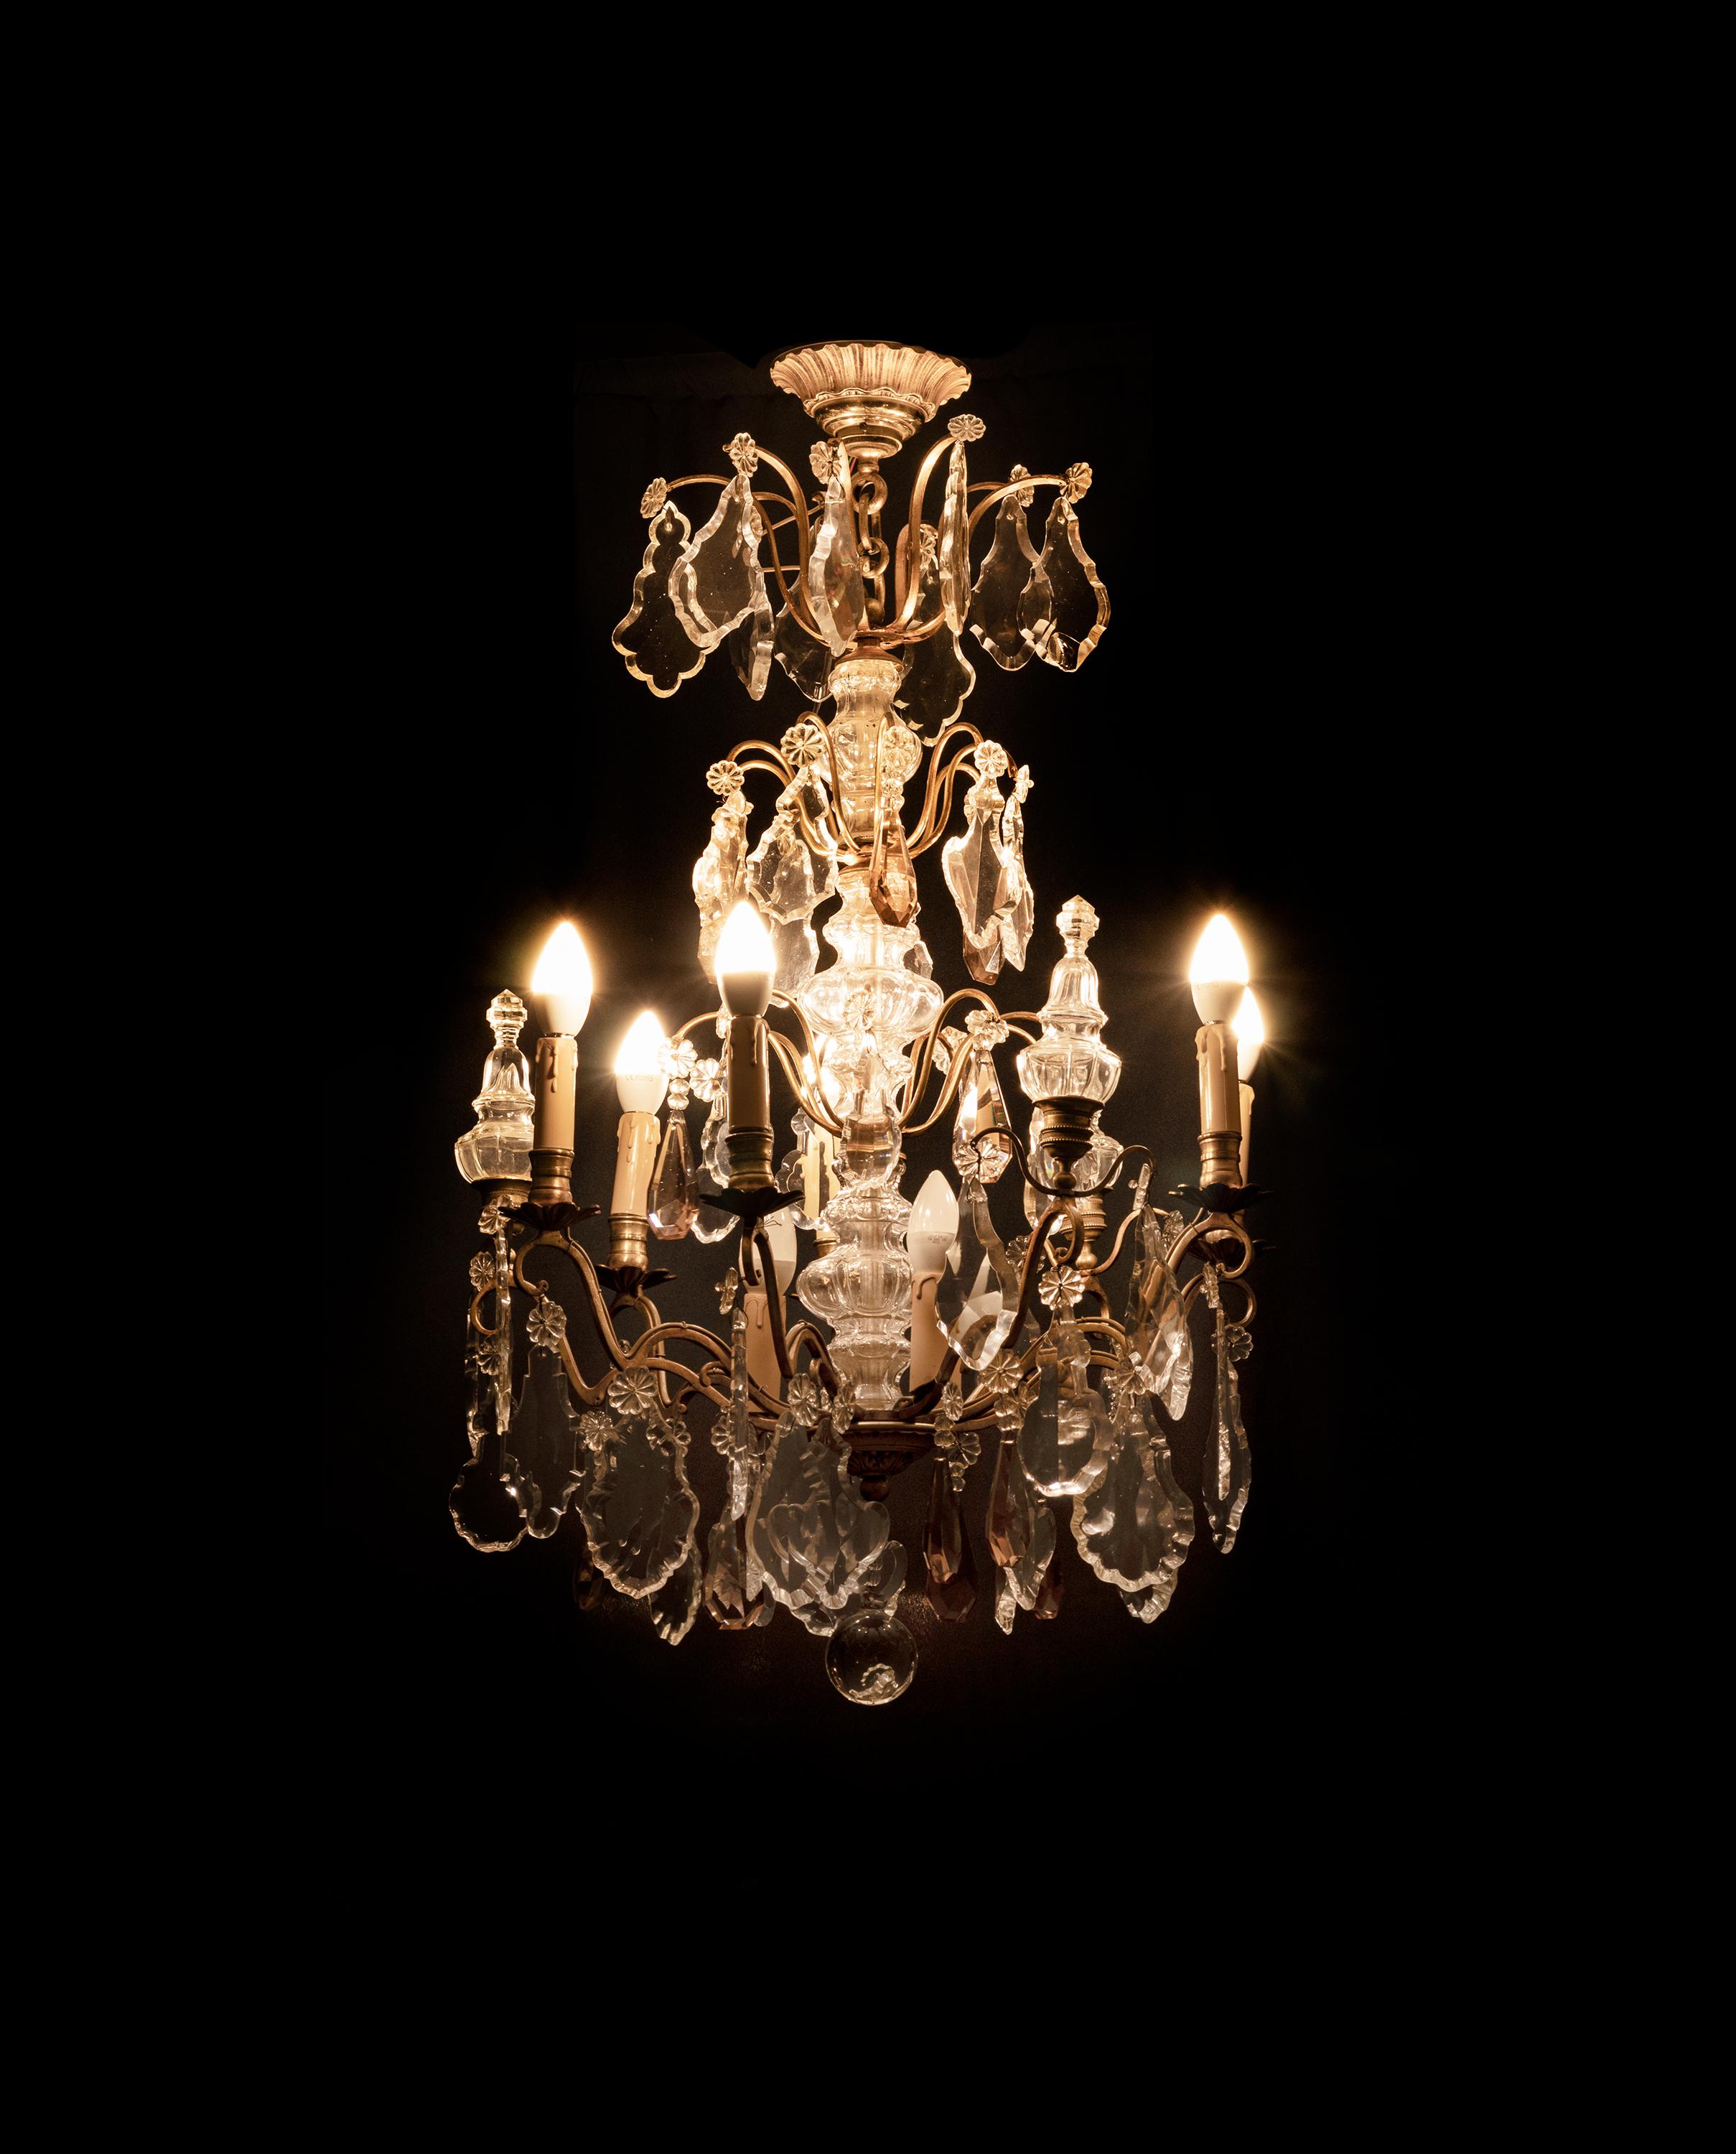  A Louis XV-Style bronze chandelier with crystal pendants and finials
and tinted glass, completed and rewired with candlestick holders and nine light sockets.

The chandelier is currently wired for both European Union and US standards LED lights.